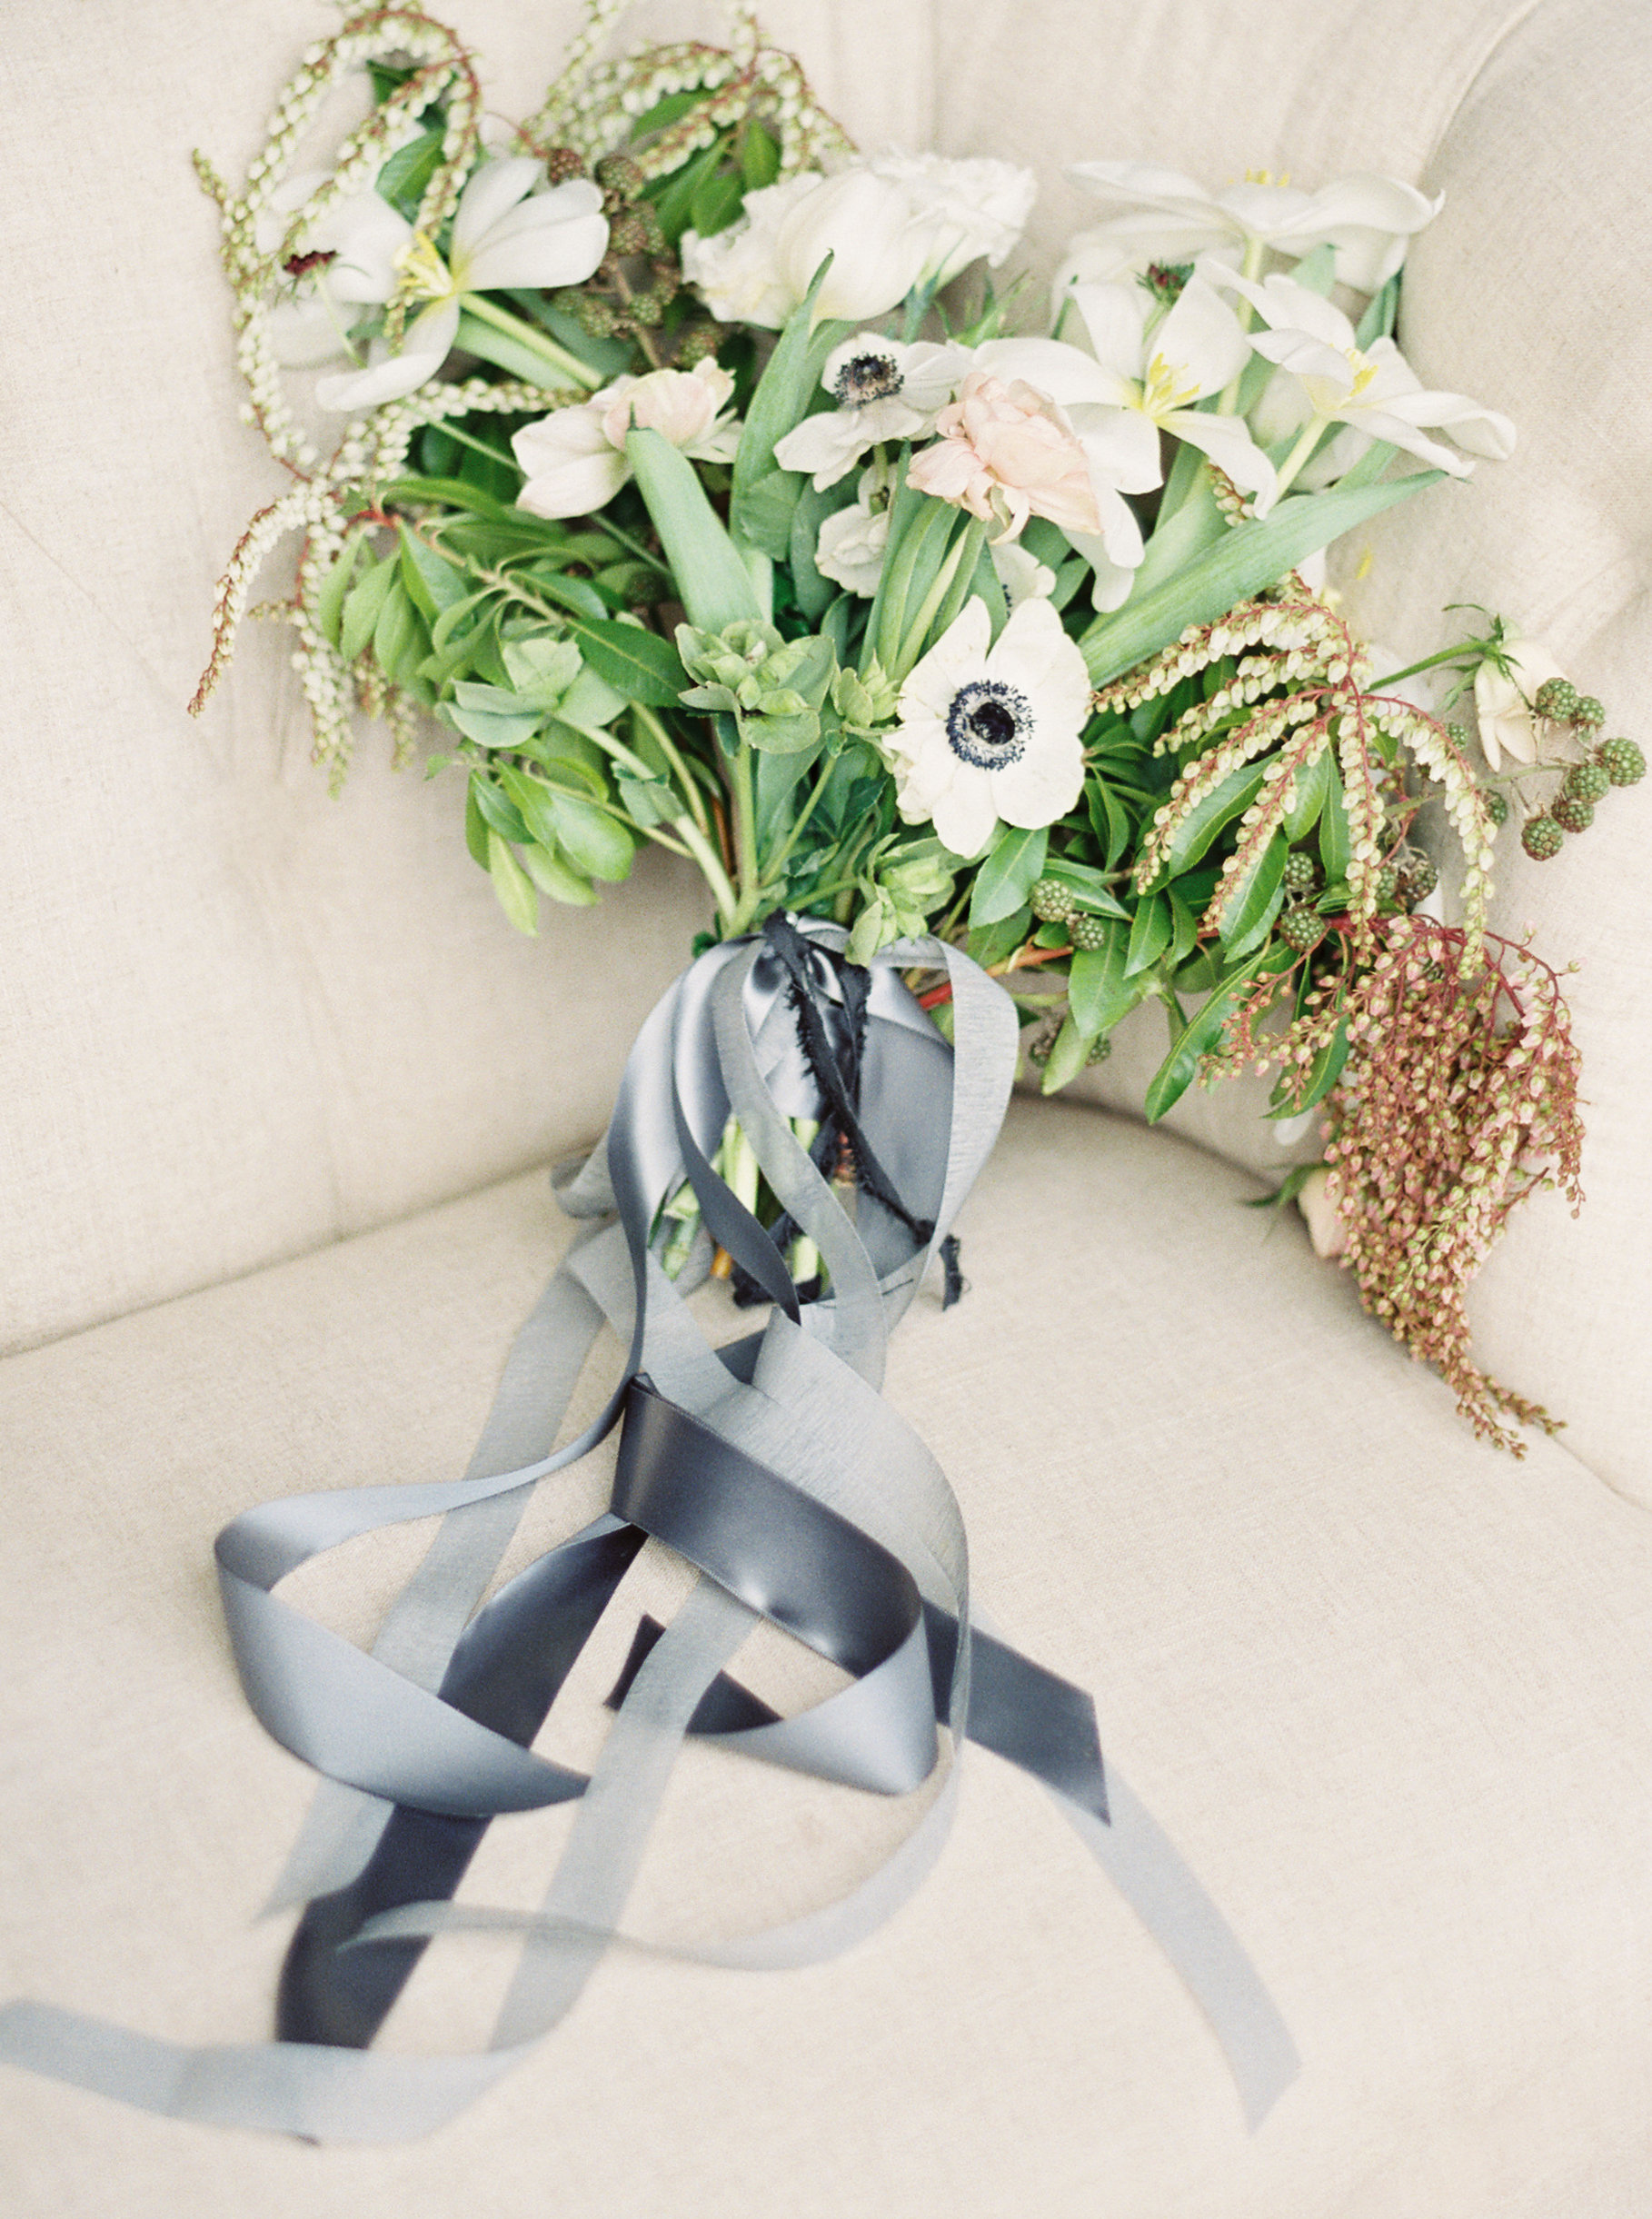 Photography: Simply Sarah Photography | Planning & Styling: Bash Bozeman | Calligraphy: Spurlé Gul Studio | Flowers: Labellum